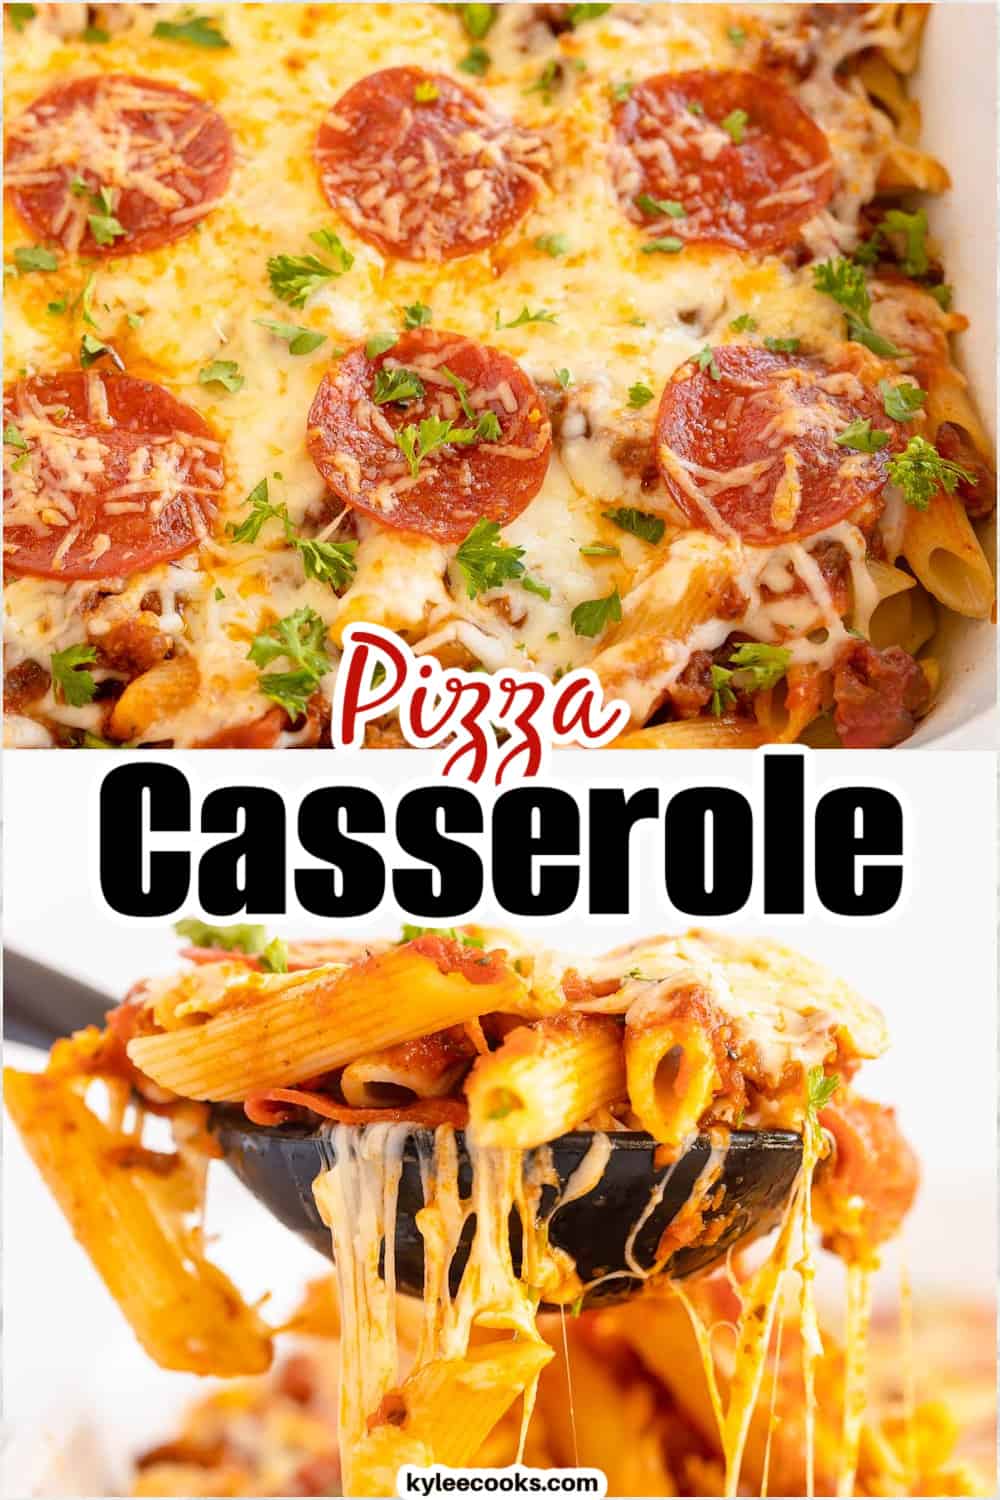 Pizza casserole in a white dish with ingredients and recipe name overlaid in text.